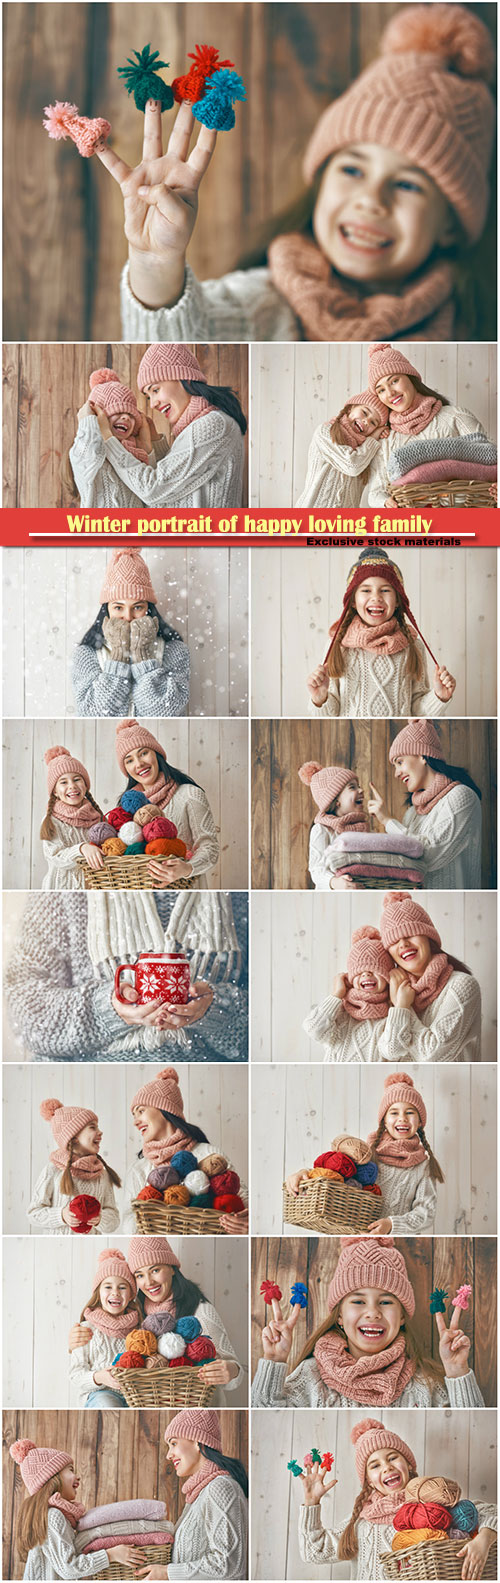 Winter portrait of happy loving family wearing knitted hats and sweaters